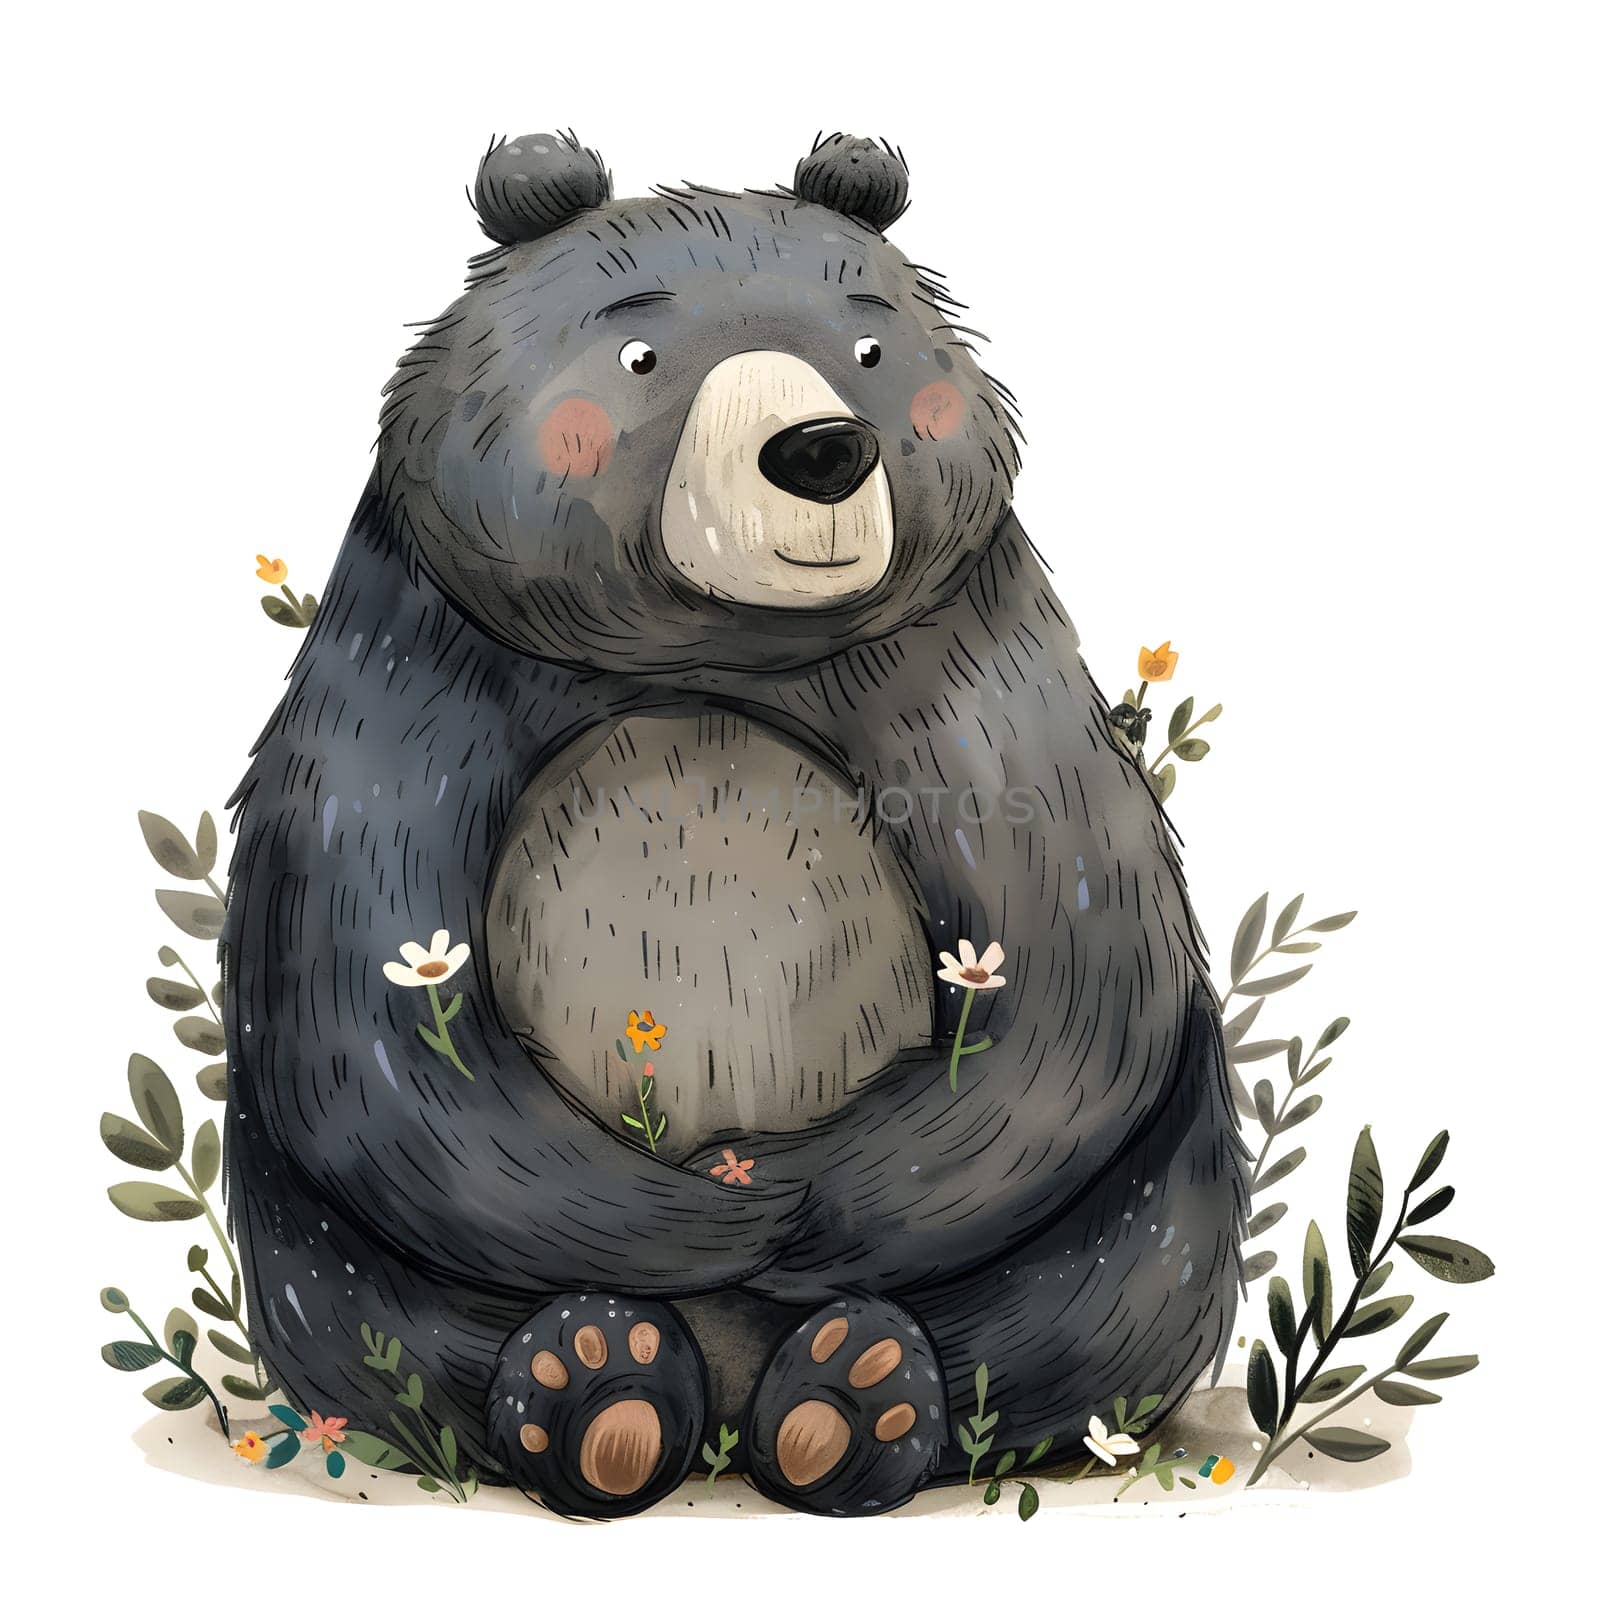 A black bear, a toy of a carnivore terrestrial animal, sits in the grass with flowers and leaves. The bear figure has a snout and fur, creating a cute art piece for serveware